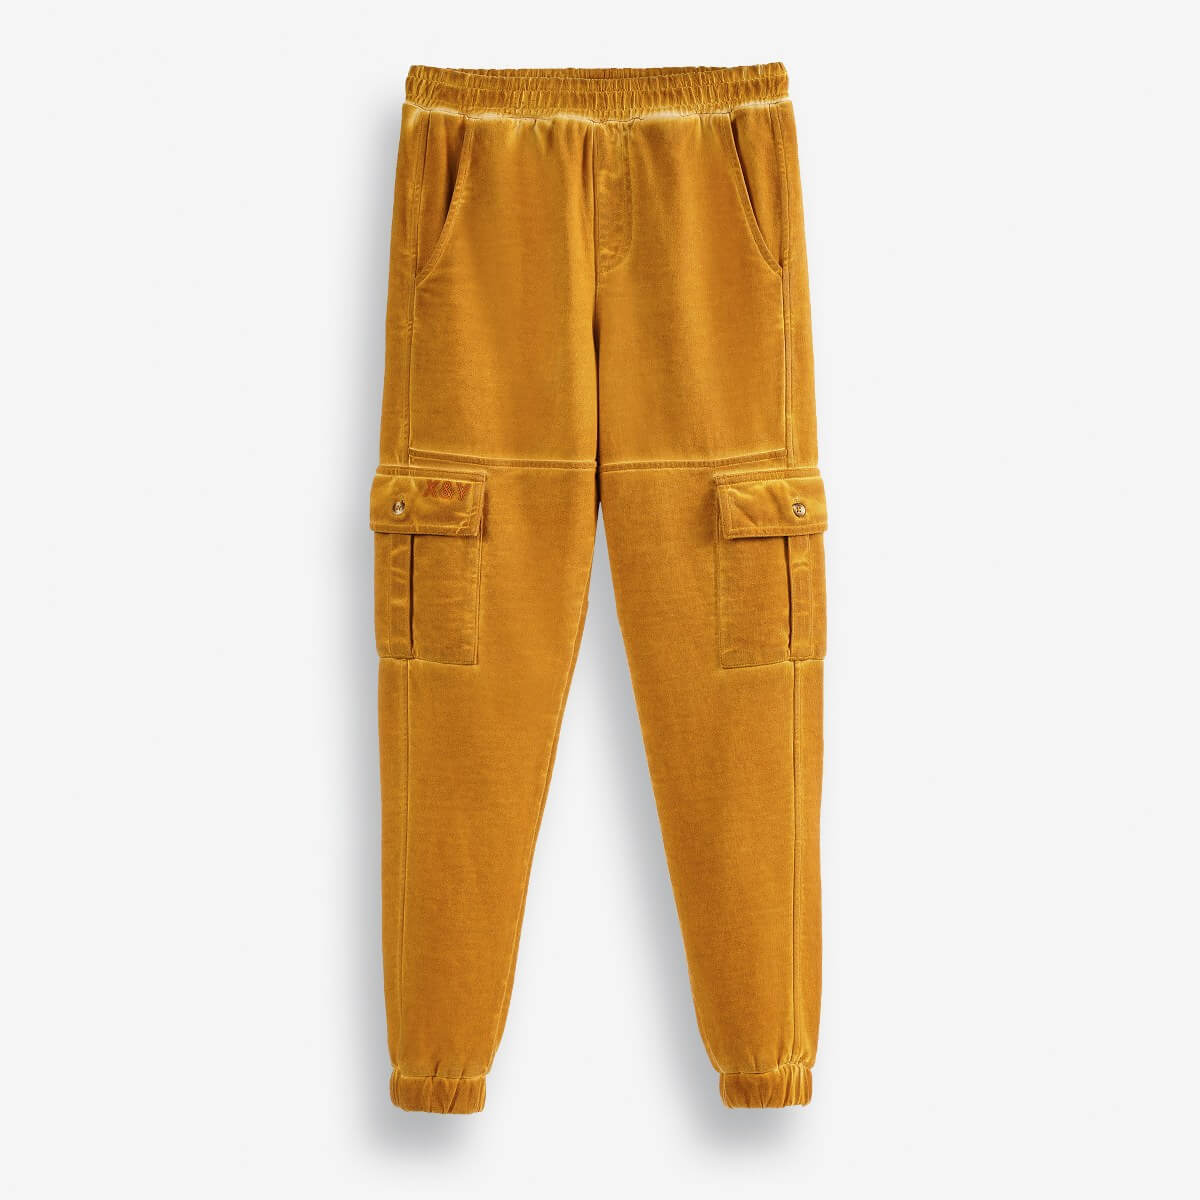 Boys' Jogging Pants with Large Side Pockets and Cuffed Ankles